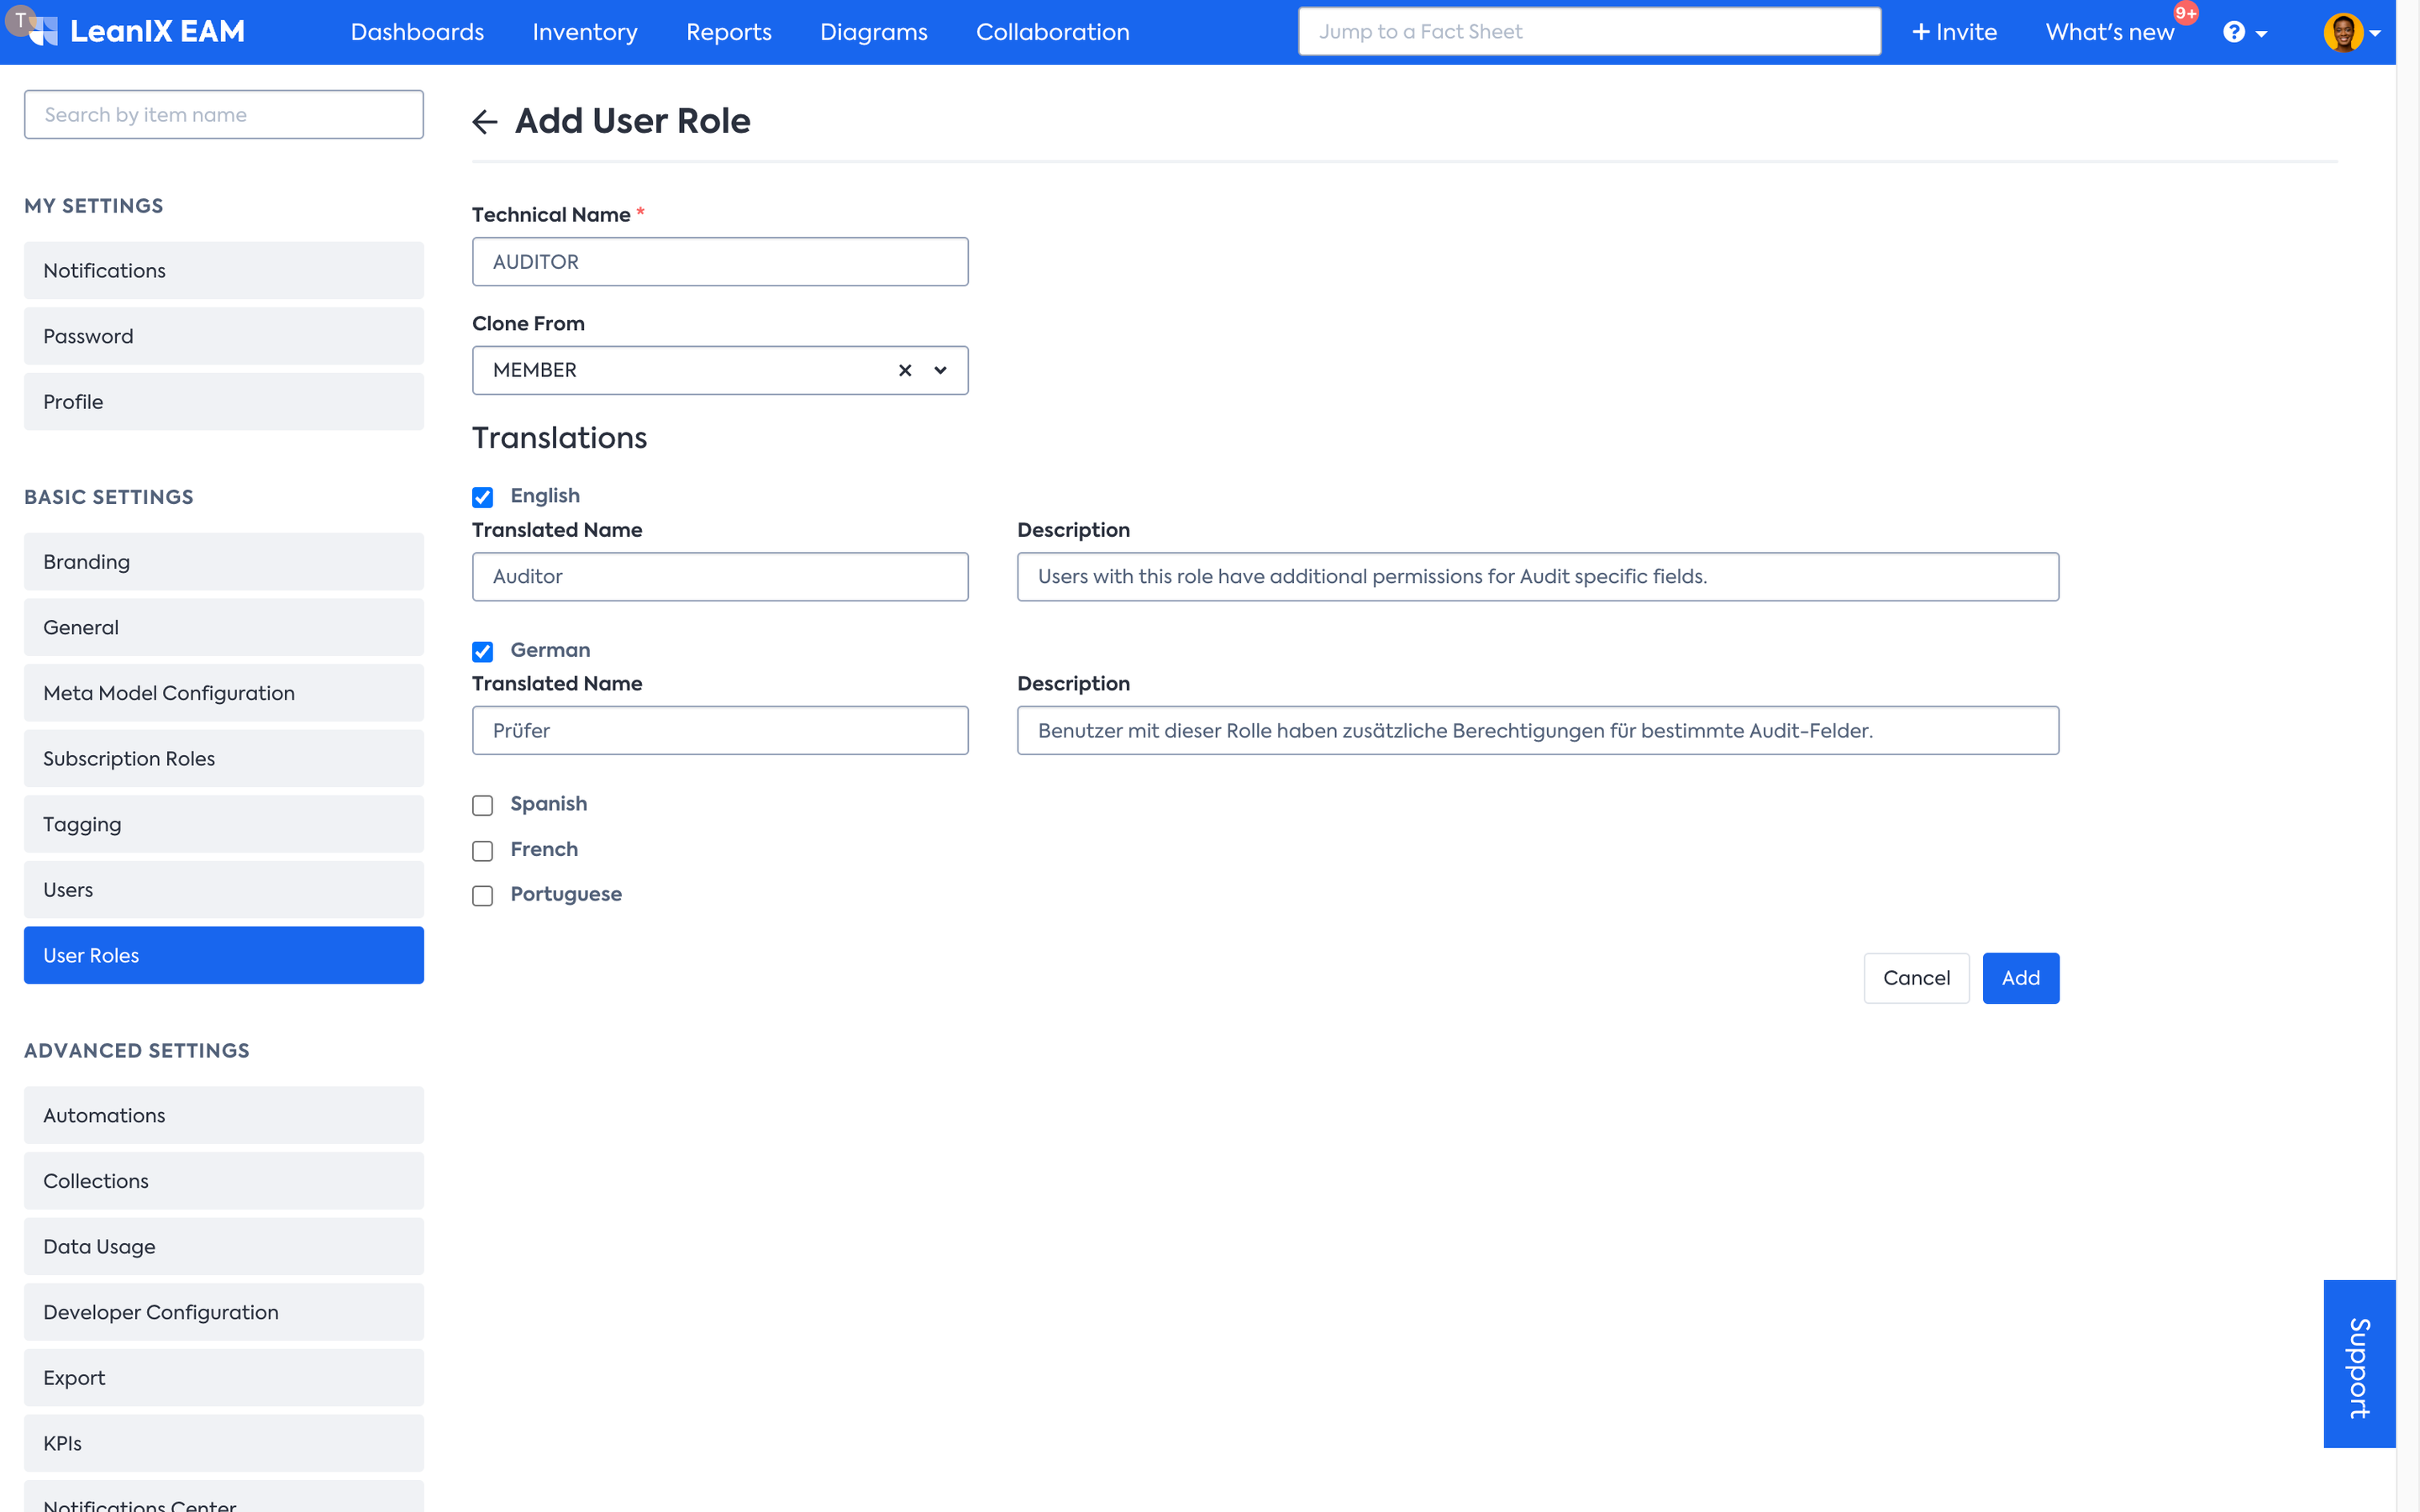 New User Role creation page